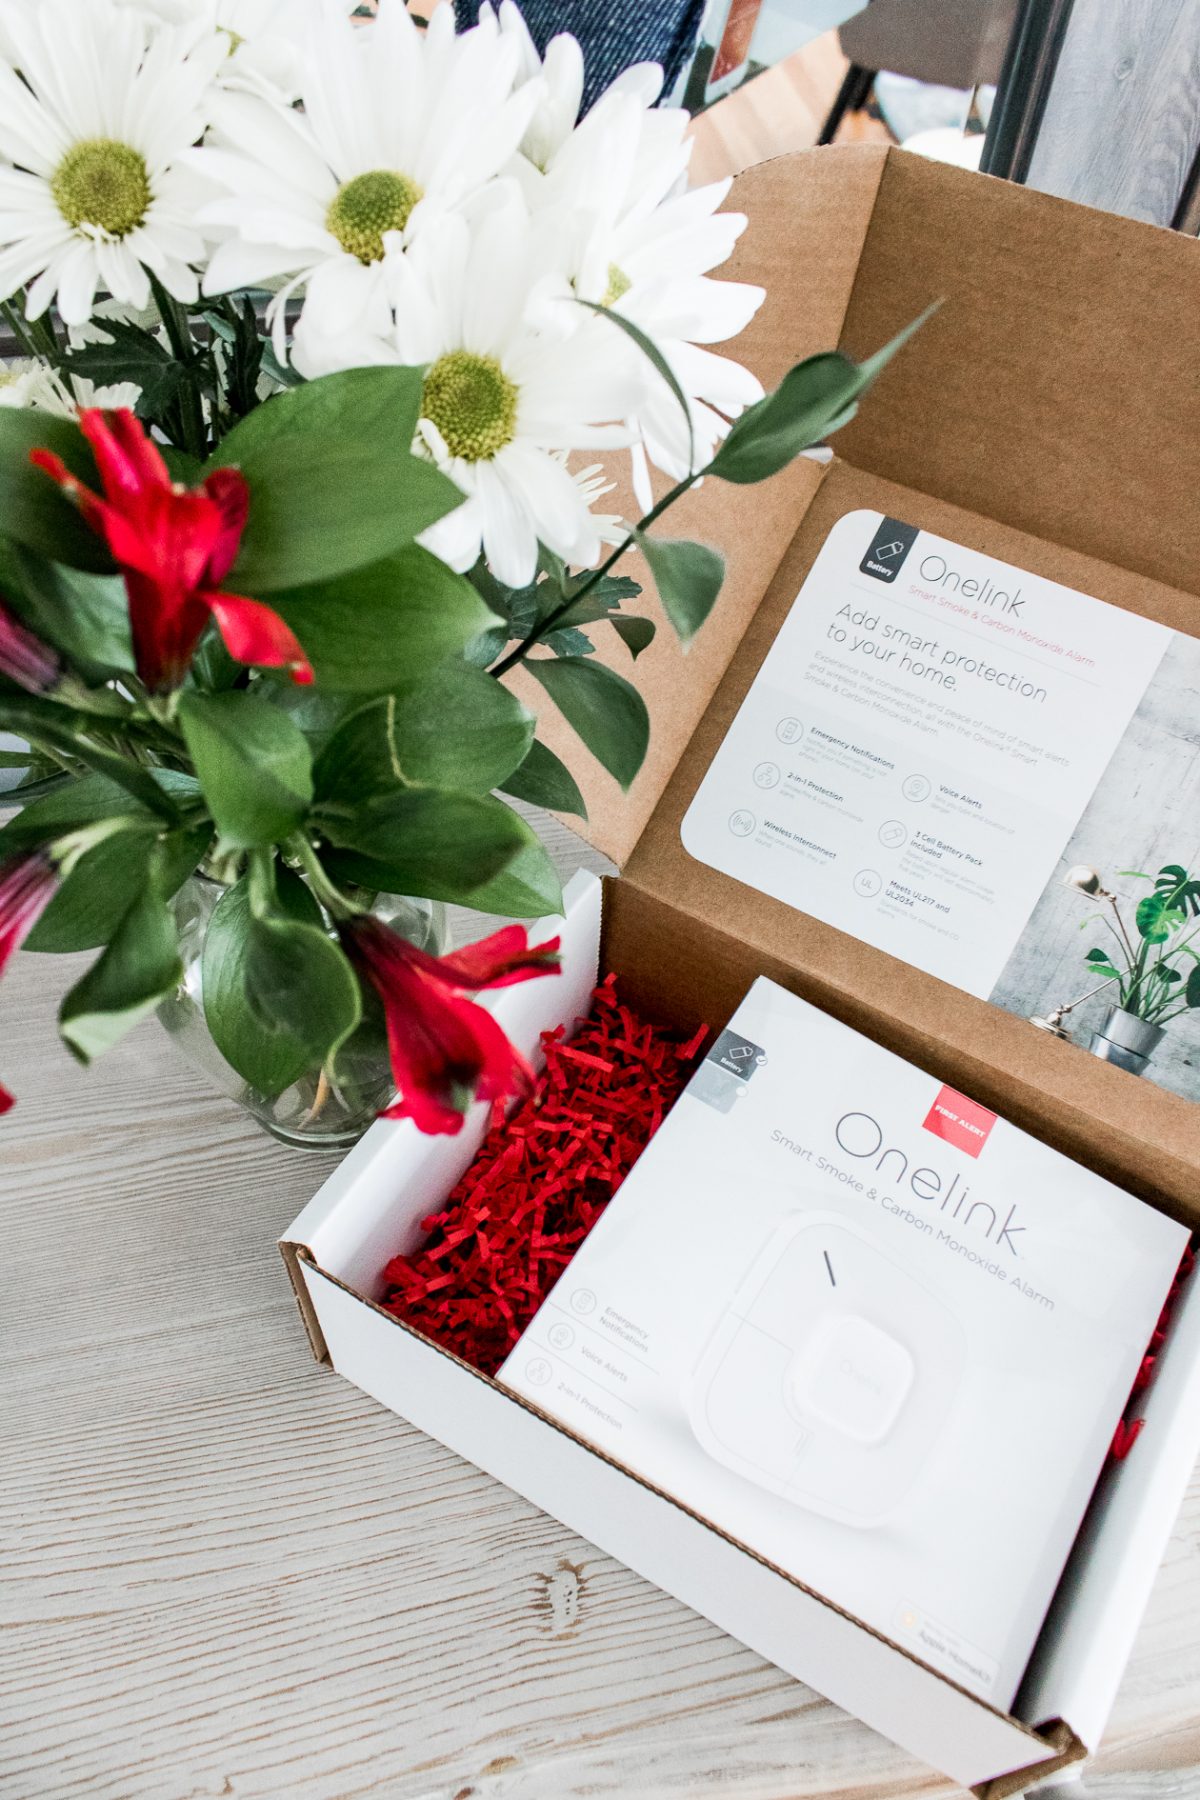 Overhead photo of Flowers and Onelink Smart Smoke & Carbon Monoxide Alarm in Box - How to Keep Your Family Safe with Onelink Smart Smoke & Carbon Monoxide Alarm